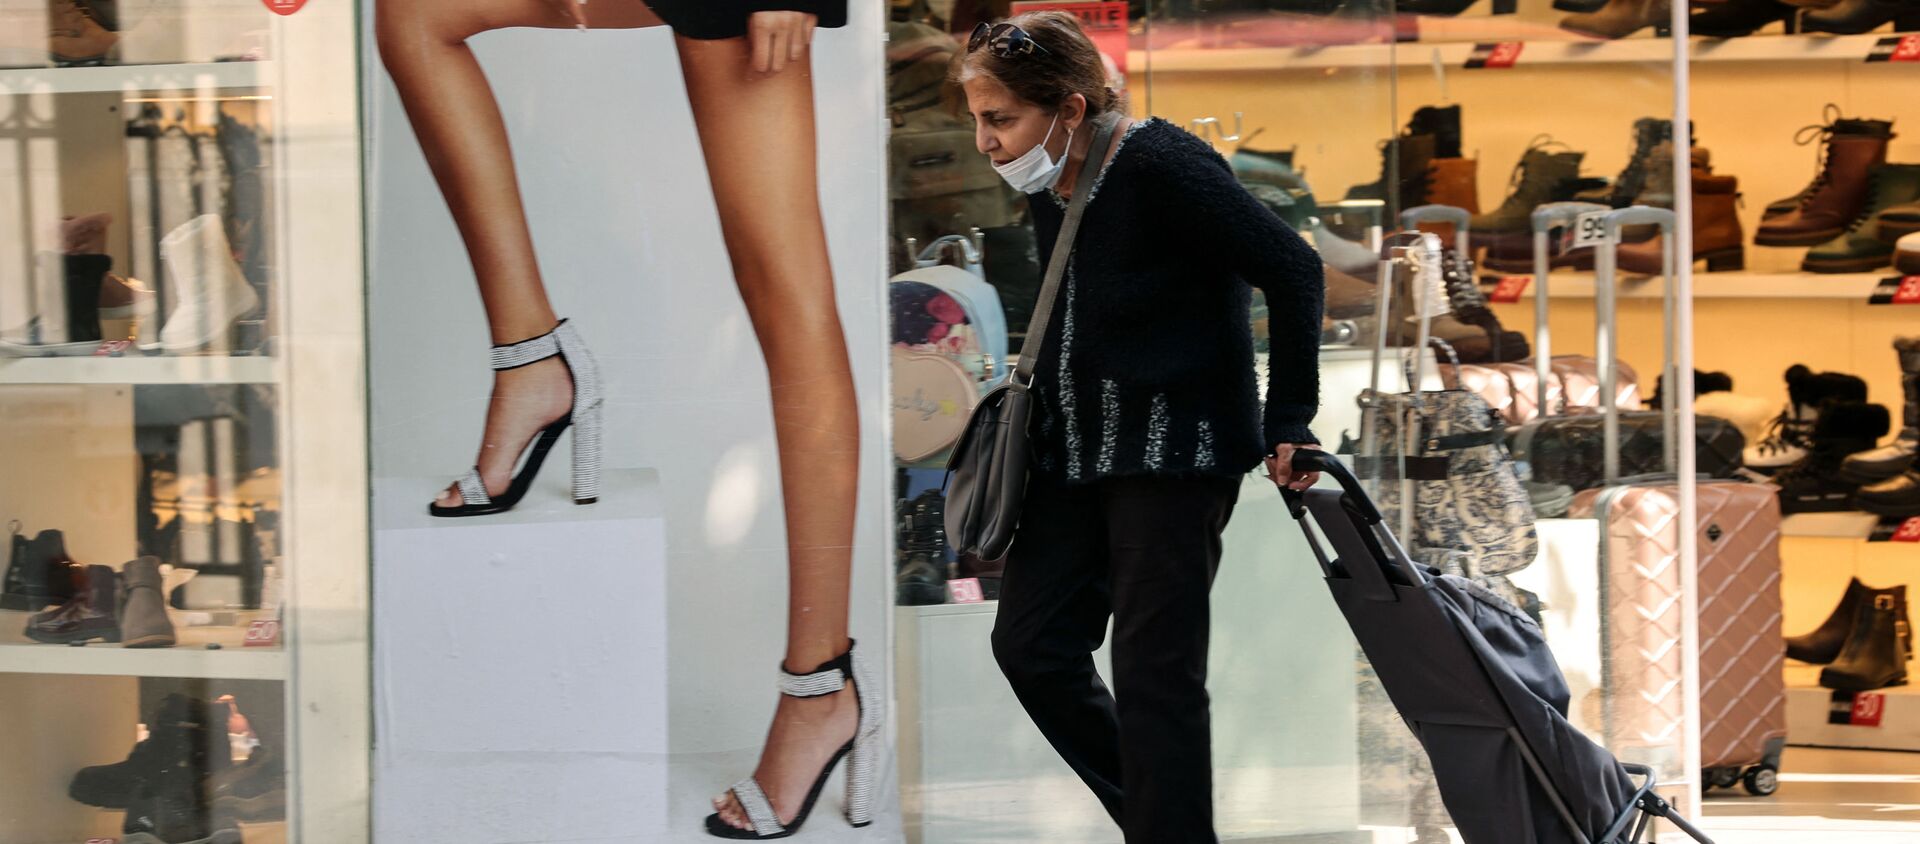 A woman walks past an open shoe store in the Israeli coastal city of Tel Aviv on February 7, 2021, following the lifting of a nationwide lockdown due to the COVID-19 pandemic.  - Sputnik International, 1920